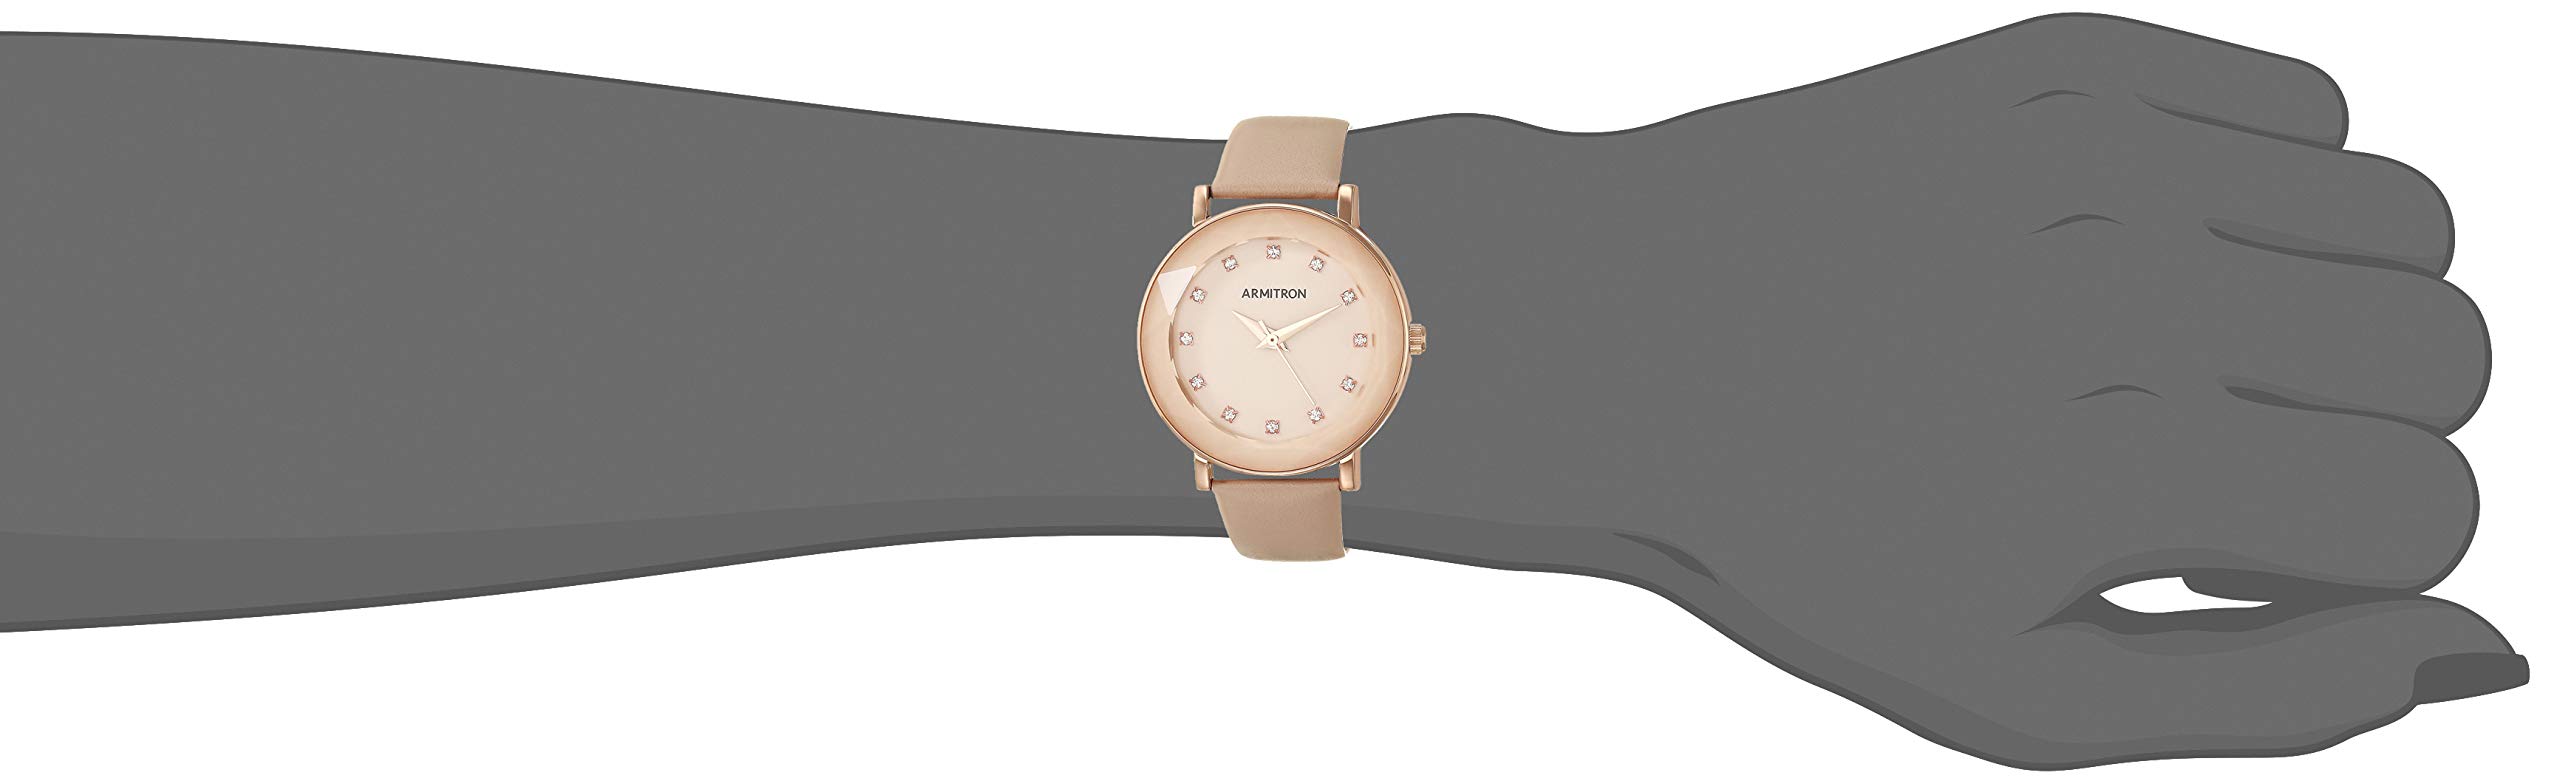 Armitron Women's Genuine Crystal Accented Rose Gold-Tone and Blush Pink Leather Strap Watch, 75/5778BHRGBH